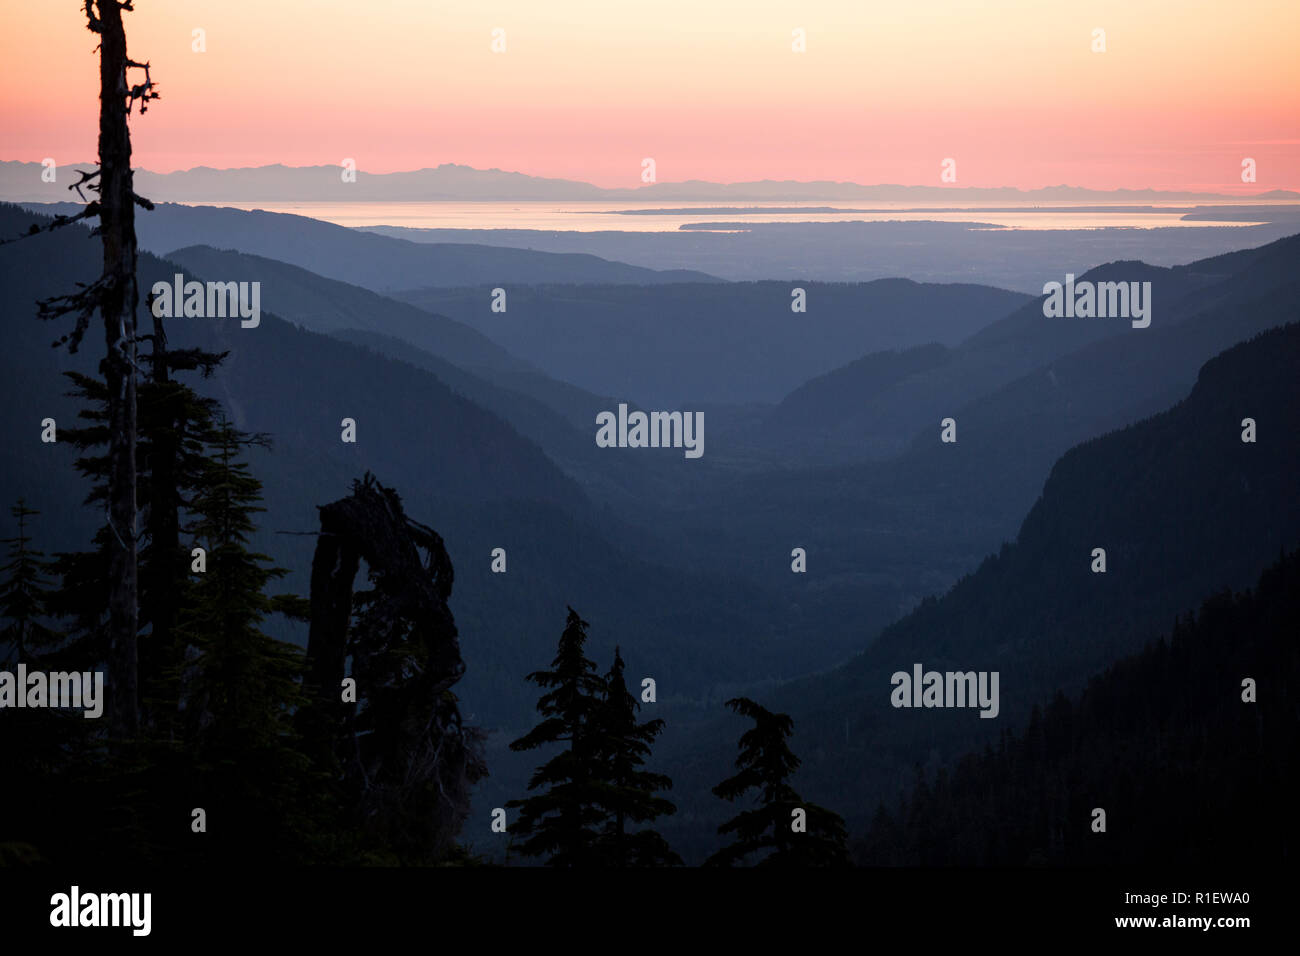 Sunset, sun set, over mountains. Sunset mountains panoramic. Colorful and scenic sunset over the Cascade Mountains. Looking towards Vancouver Island. Stock Photo